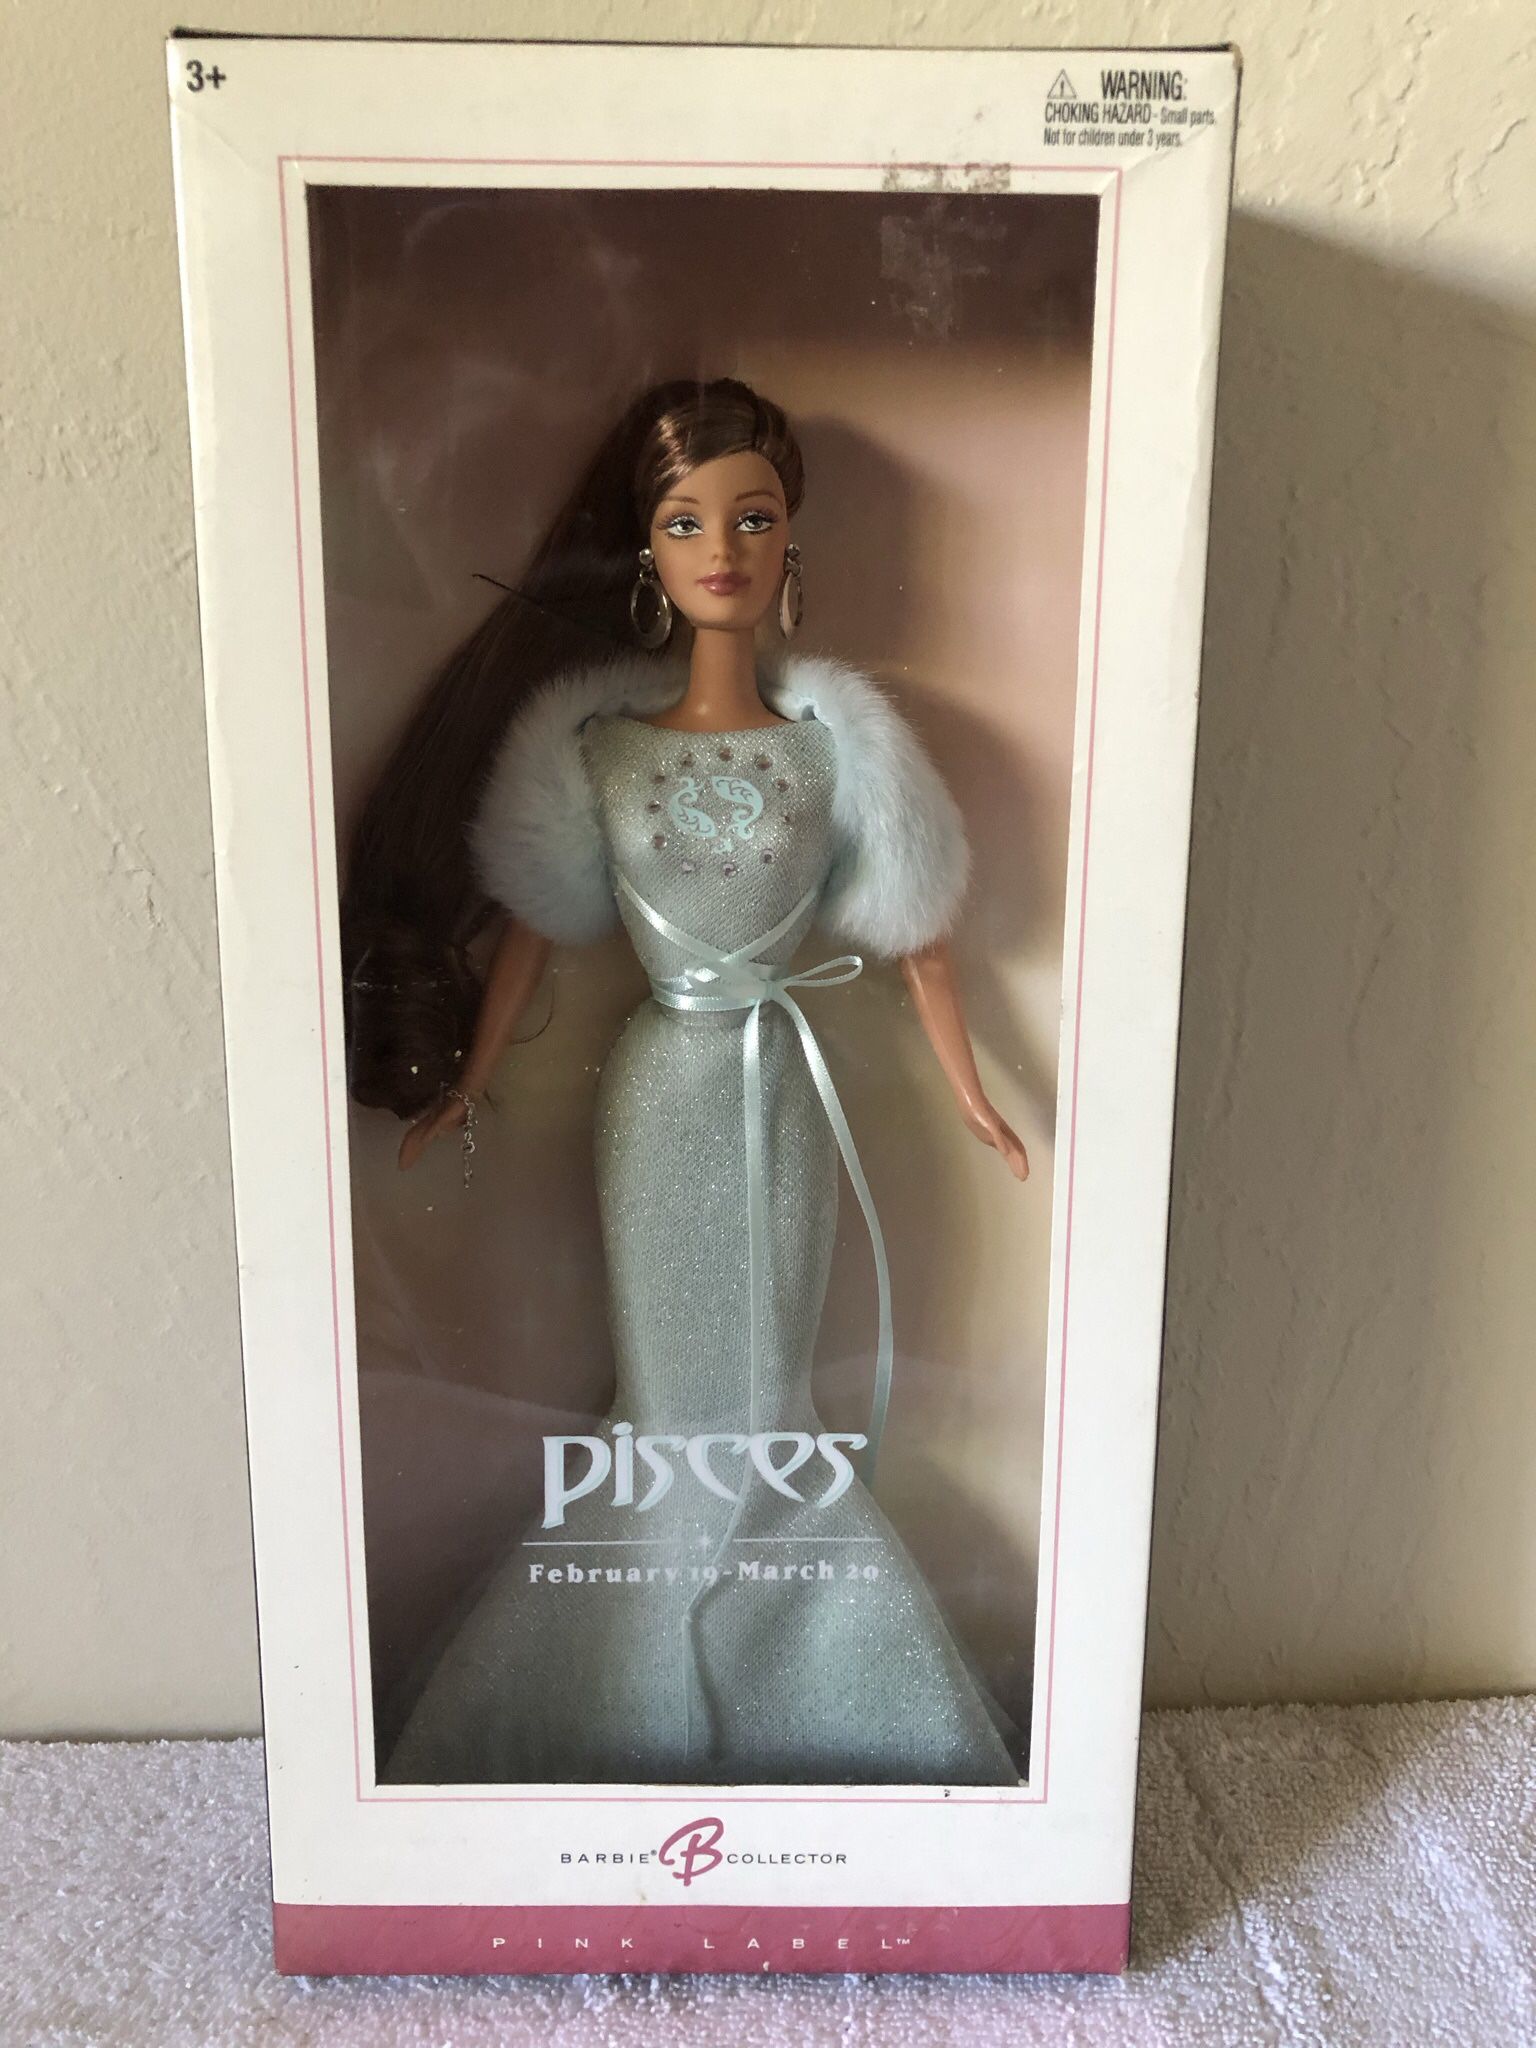 Collectible Barbie Doll Pisces